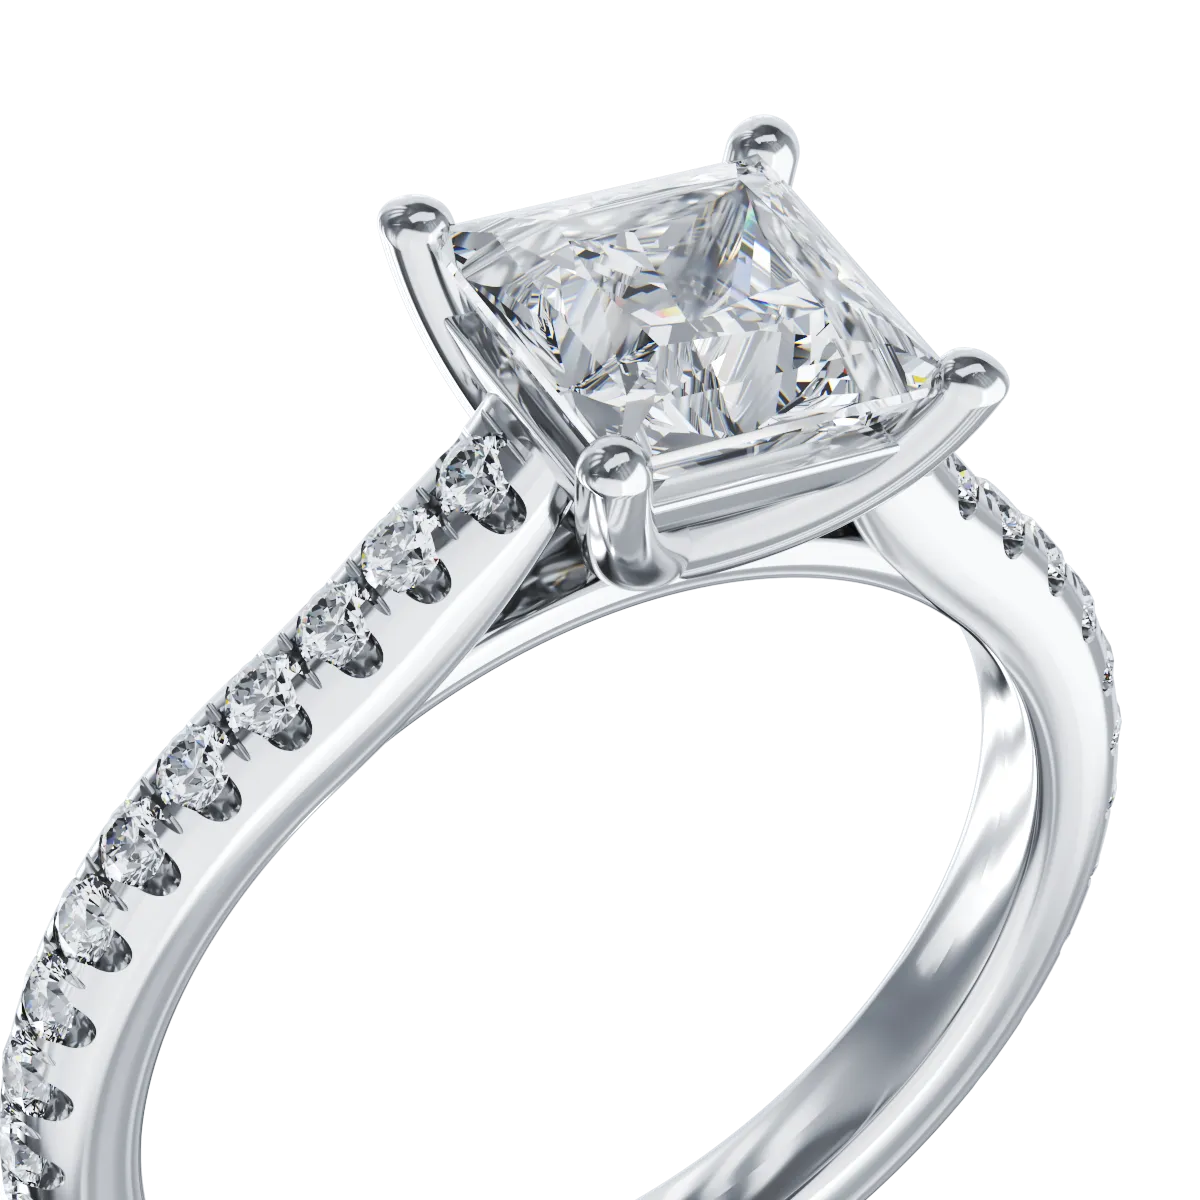 18K white gold engagement ring with 1.5ct diamond and 0.33ct diamonds